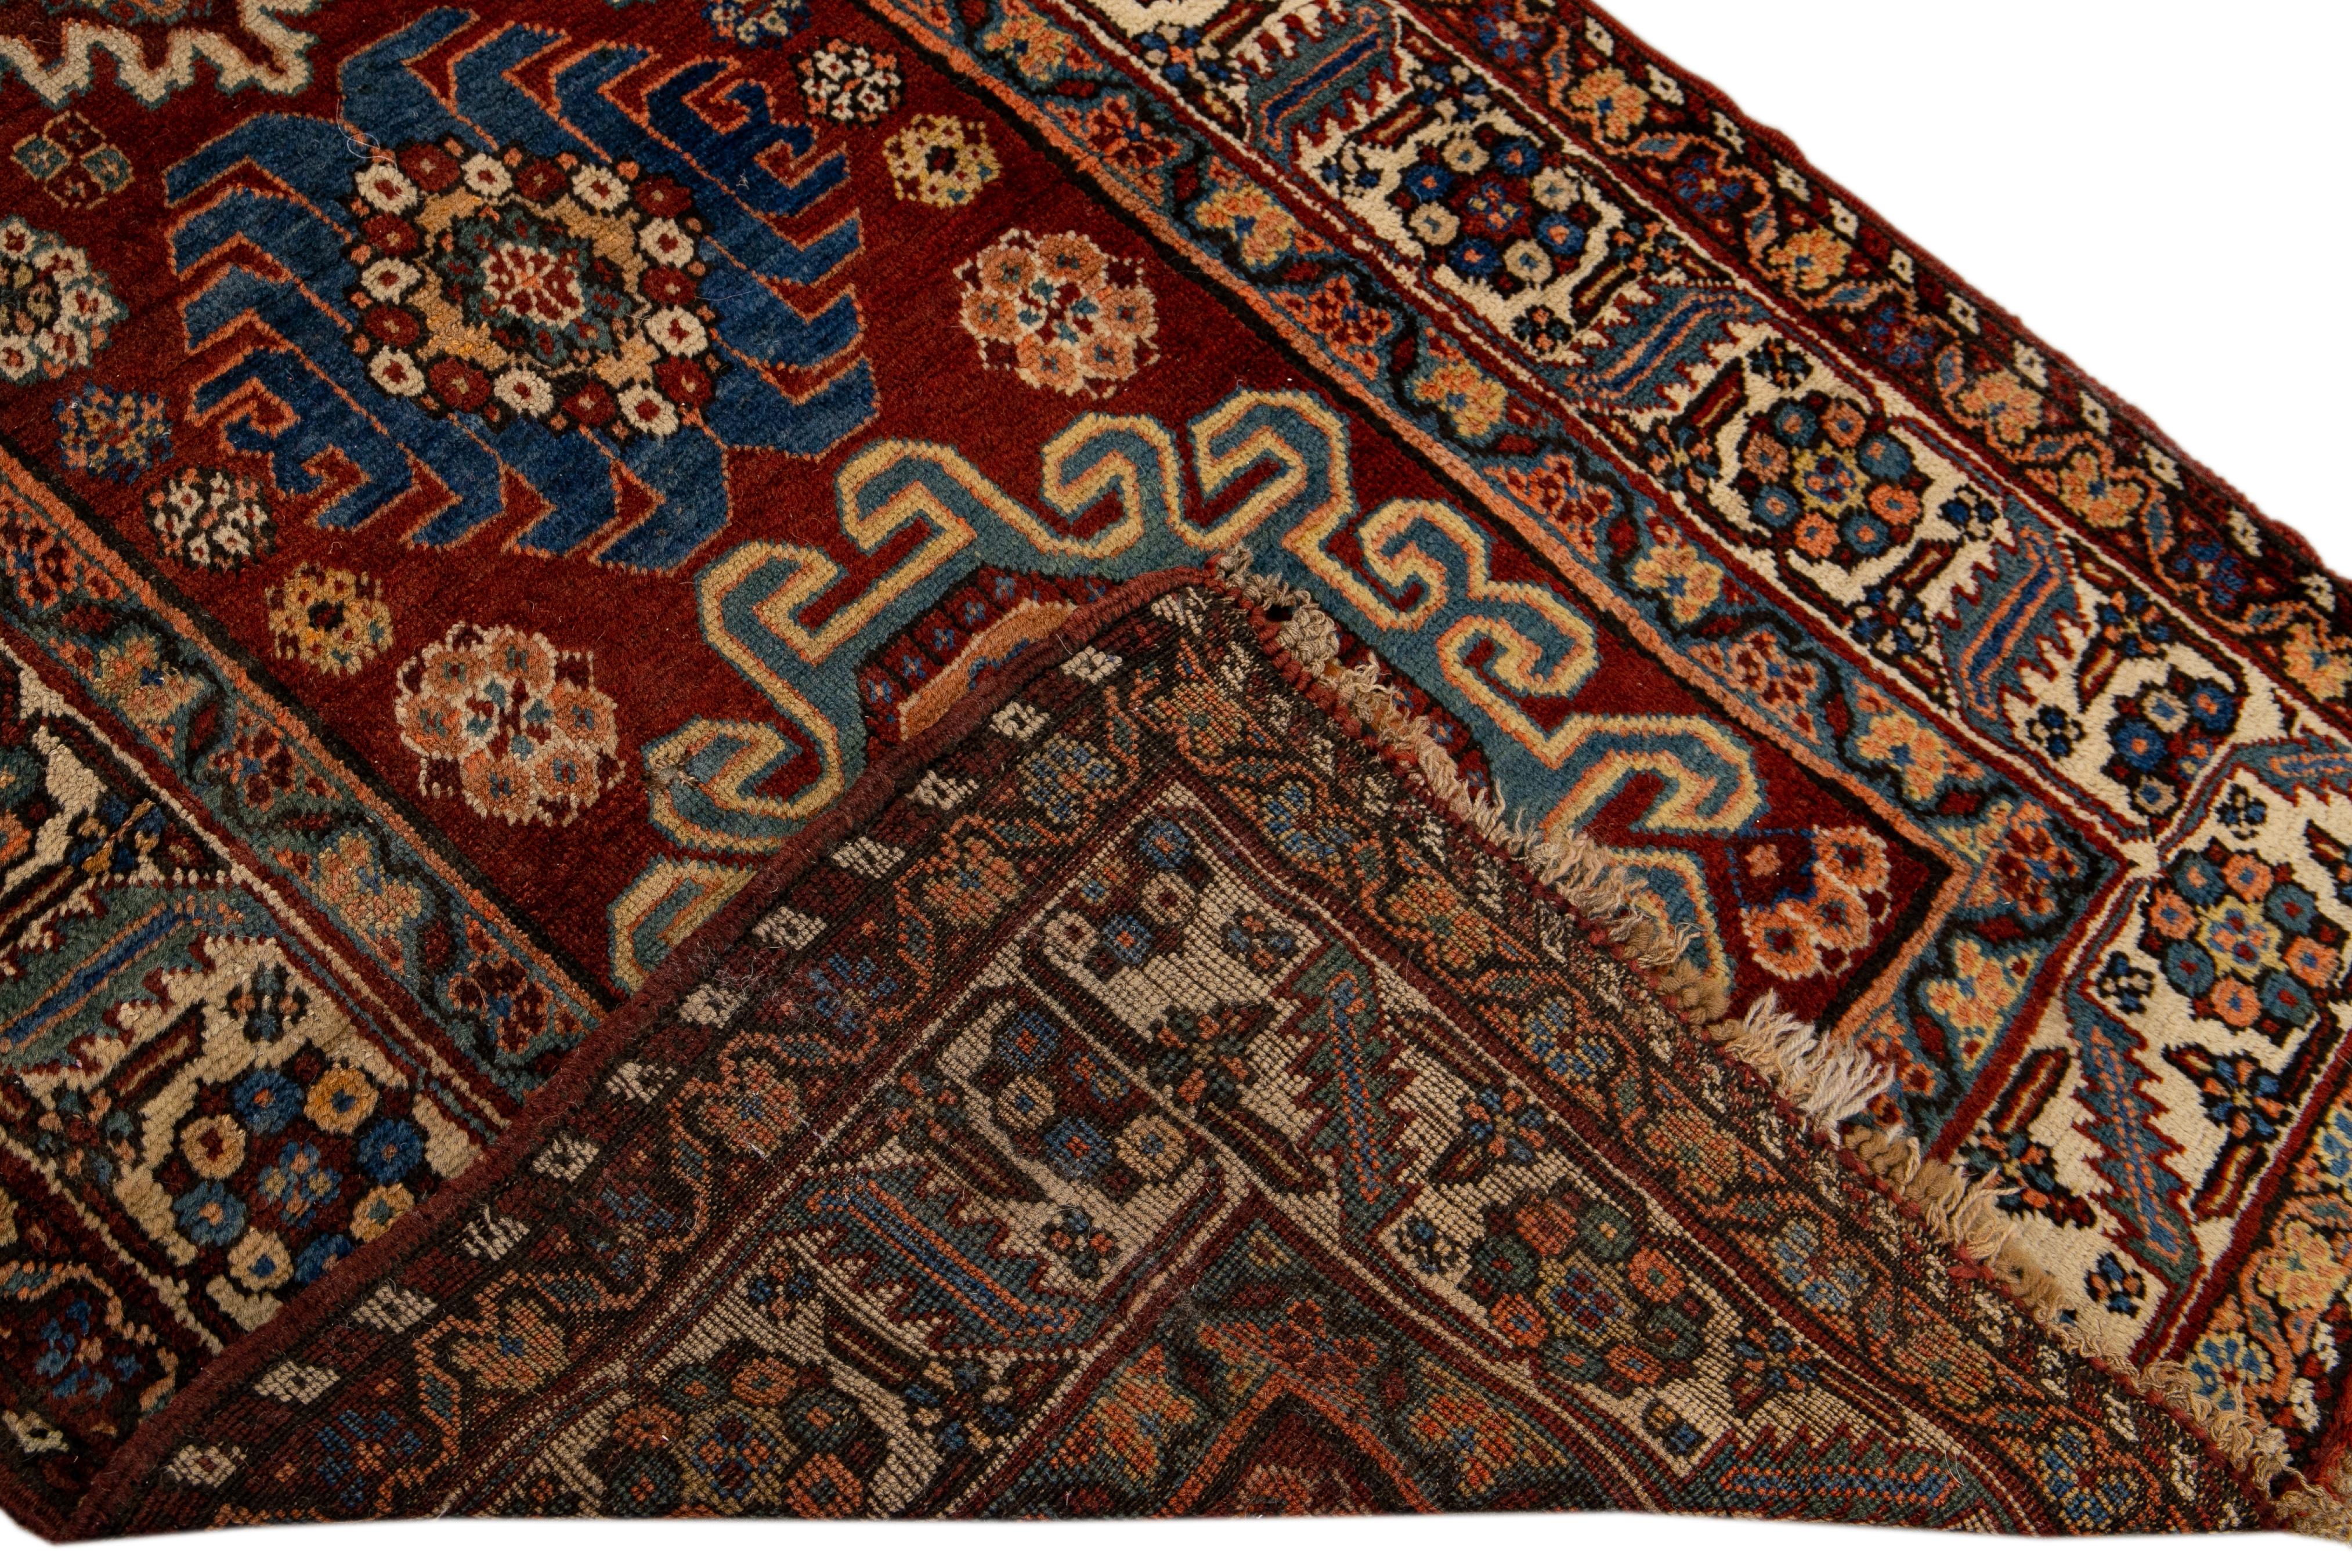 Beautiful antique Serapi hand-knotted wool rug with a red field. This Persian rug has a beige frame and multicolor accents in a gorgeous all-over geometric multi medallion floral motif.

This rug measures: 3'4